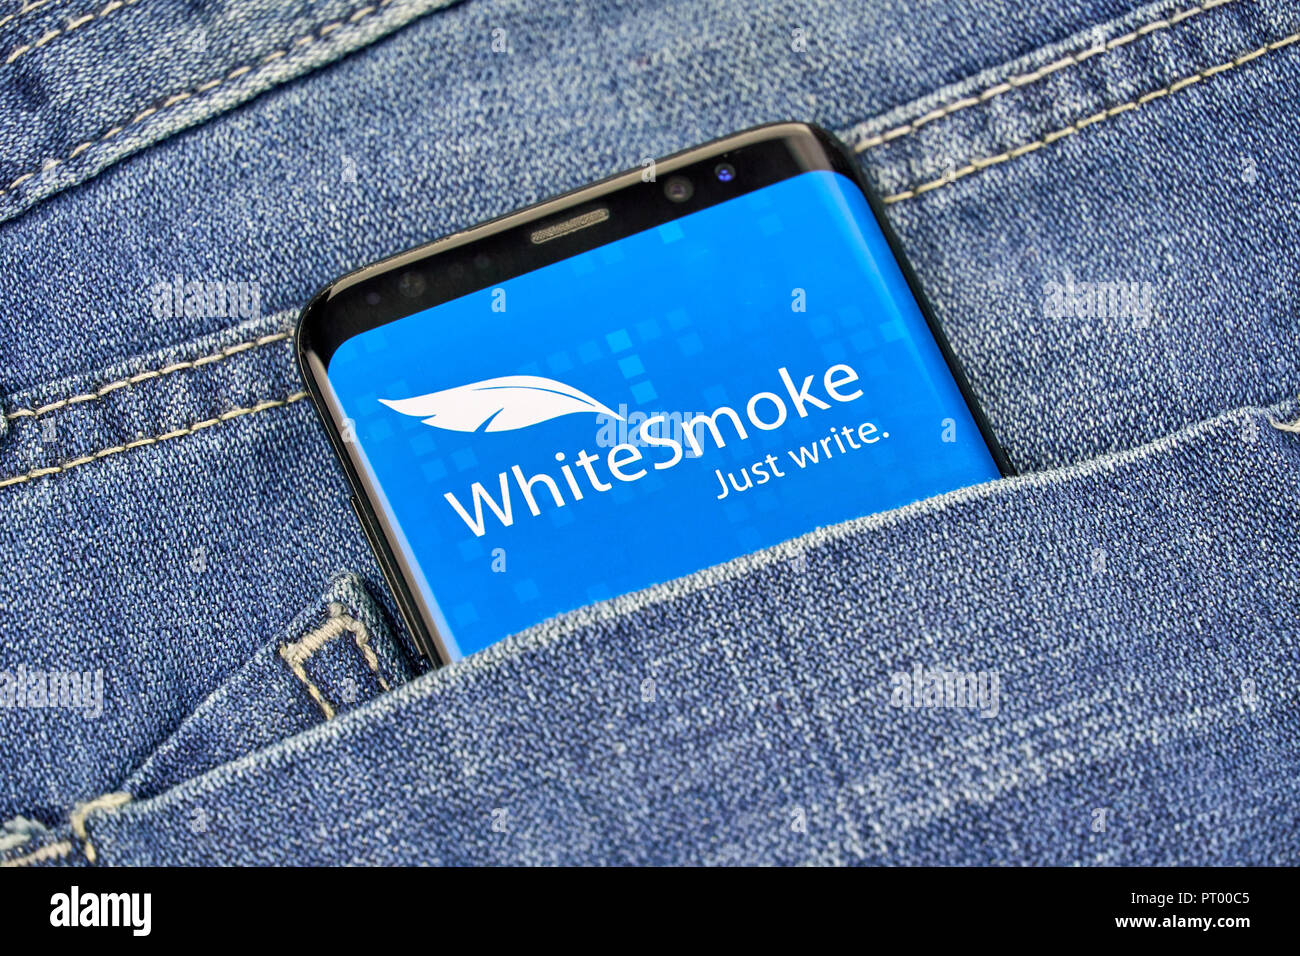 MONTREAL, CANADA - OCTOBER 4, 2018: WhiteSmoke grammar check app on s8 Android device. WhiteSmoke app is English language mistakes detector and correc Stock Photo